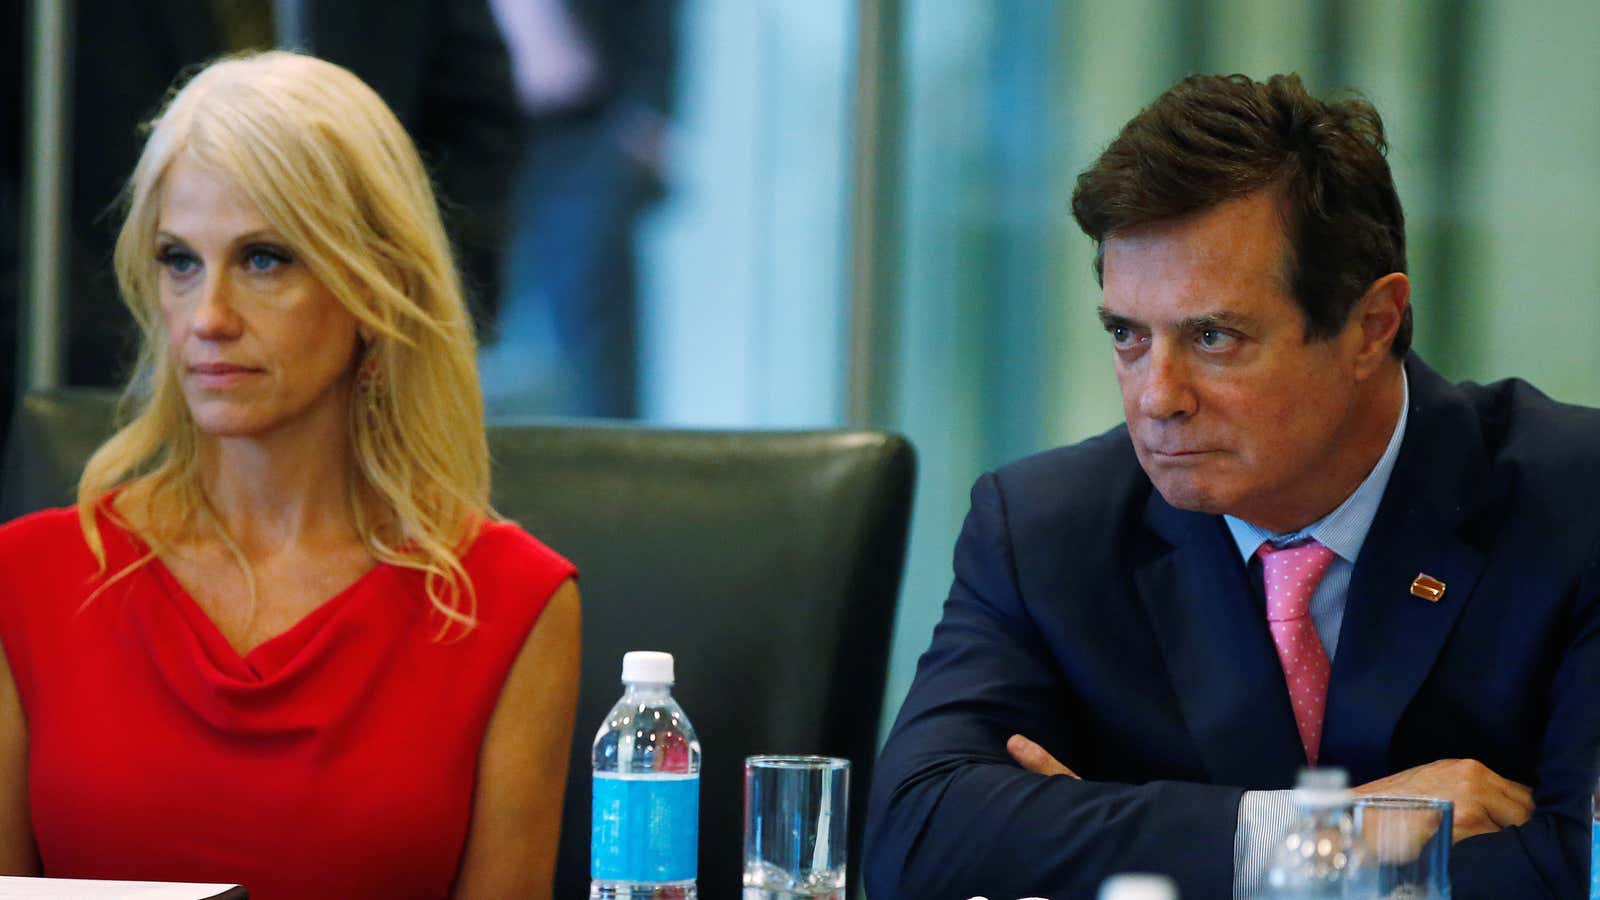 Kellyanne Conway and Paul Manafort discuss Donald Trump’s campaign strategy during the 2016 election.